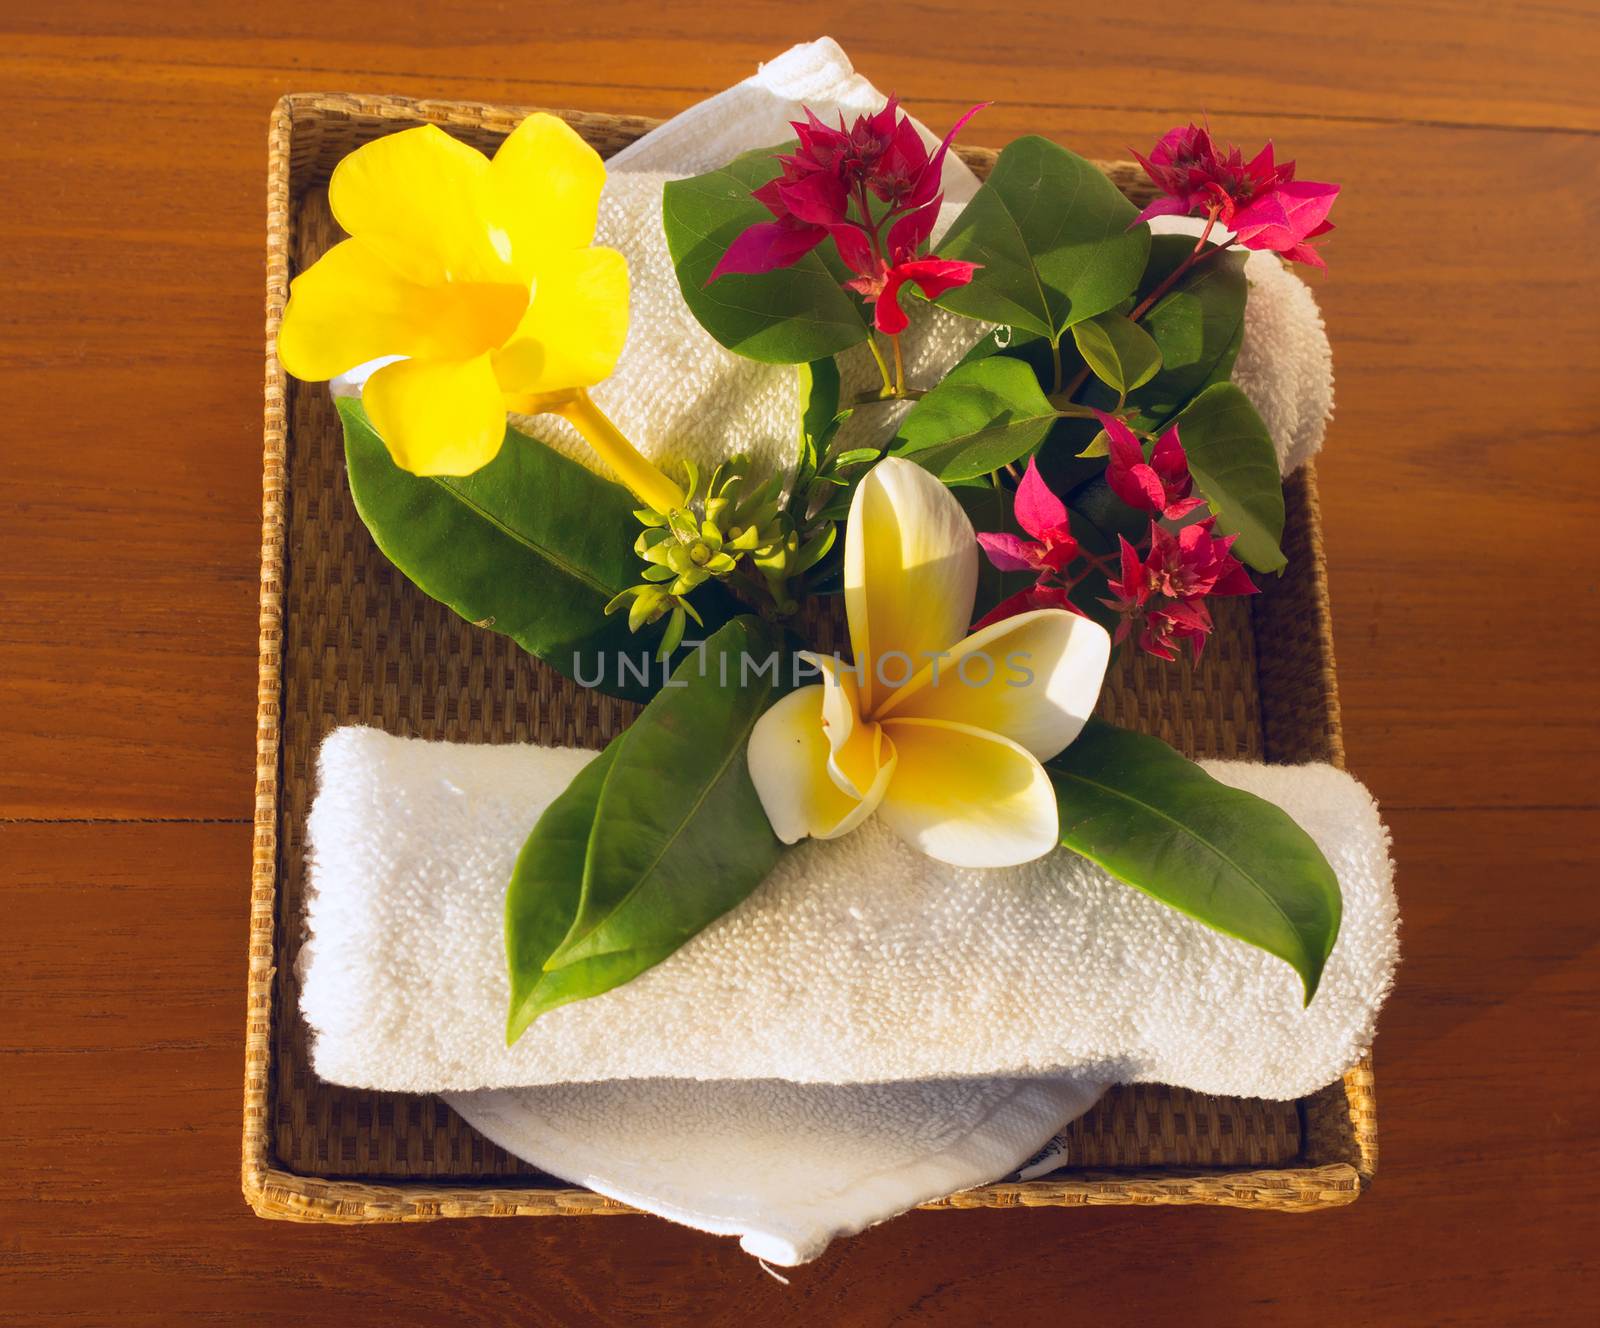 Towels and red, yelow and white flowers by BIG_TAU